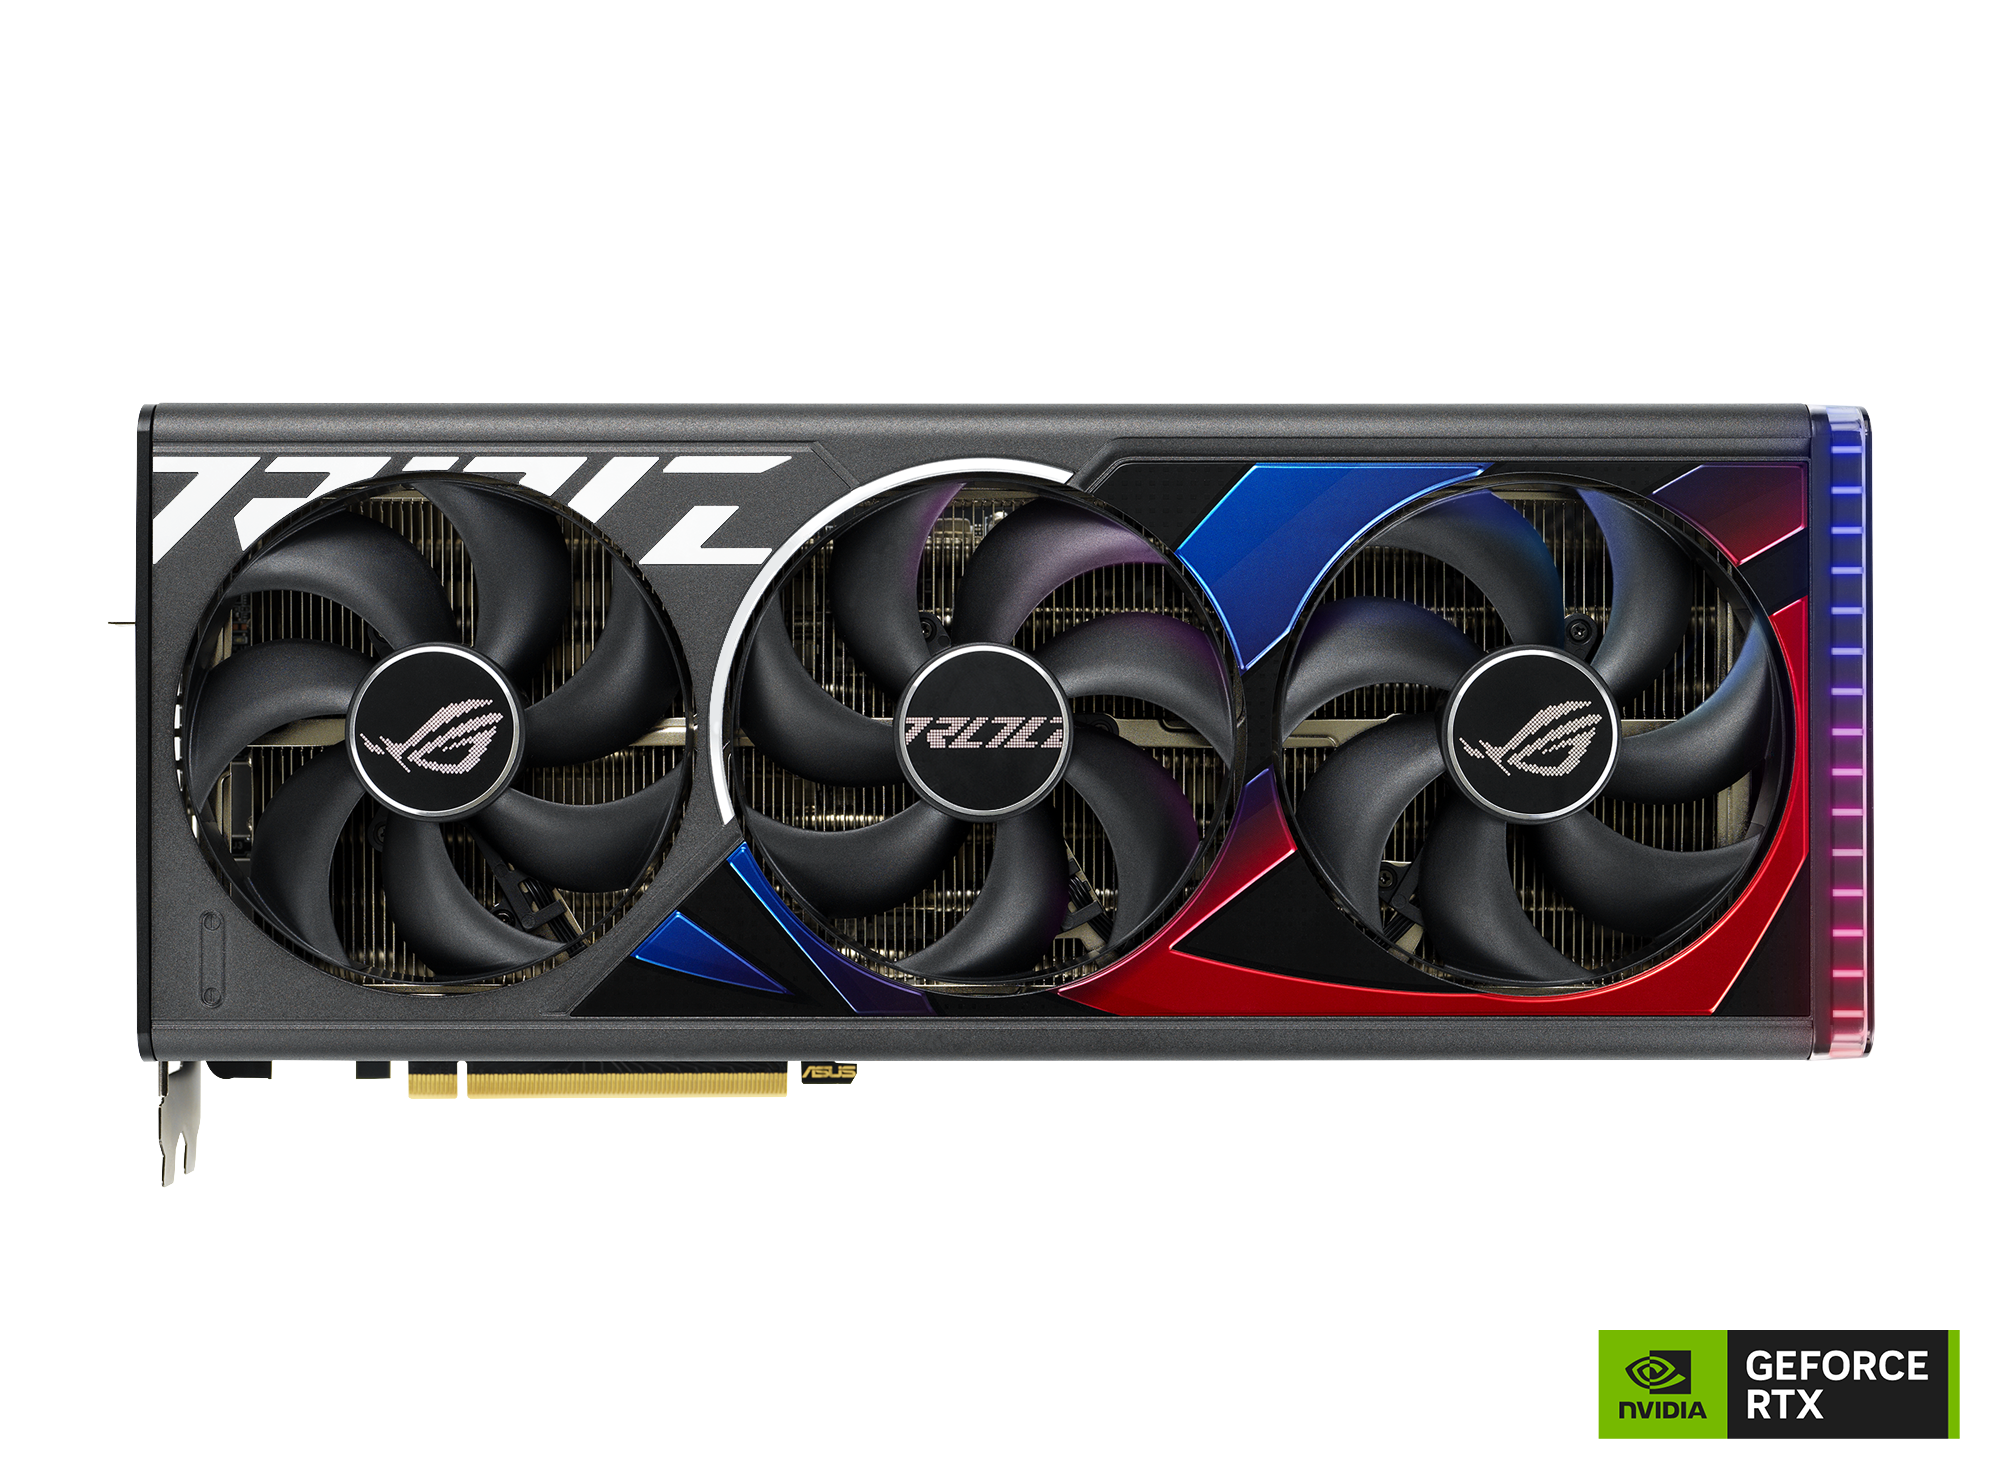 NVIDIA GeForce RTX 4090 Ti - What a MONSTER!!! [Real Photo] 